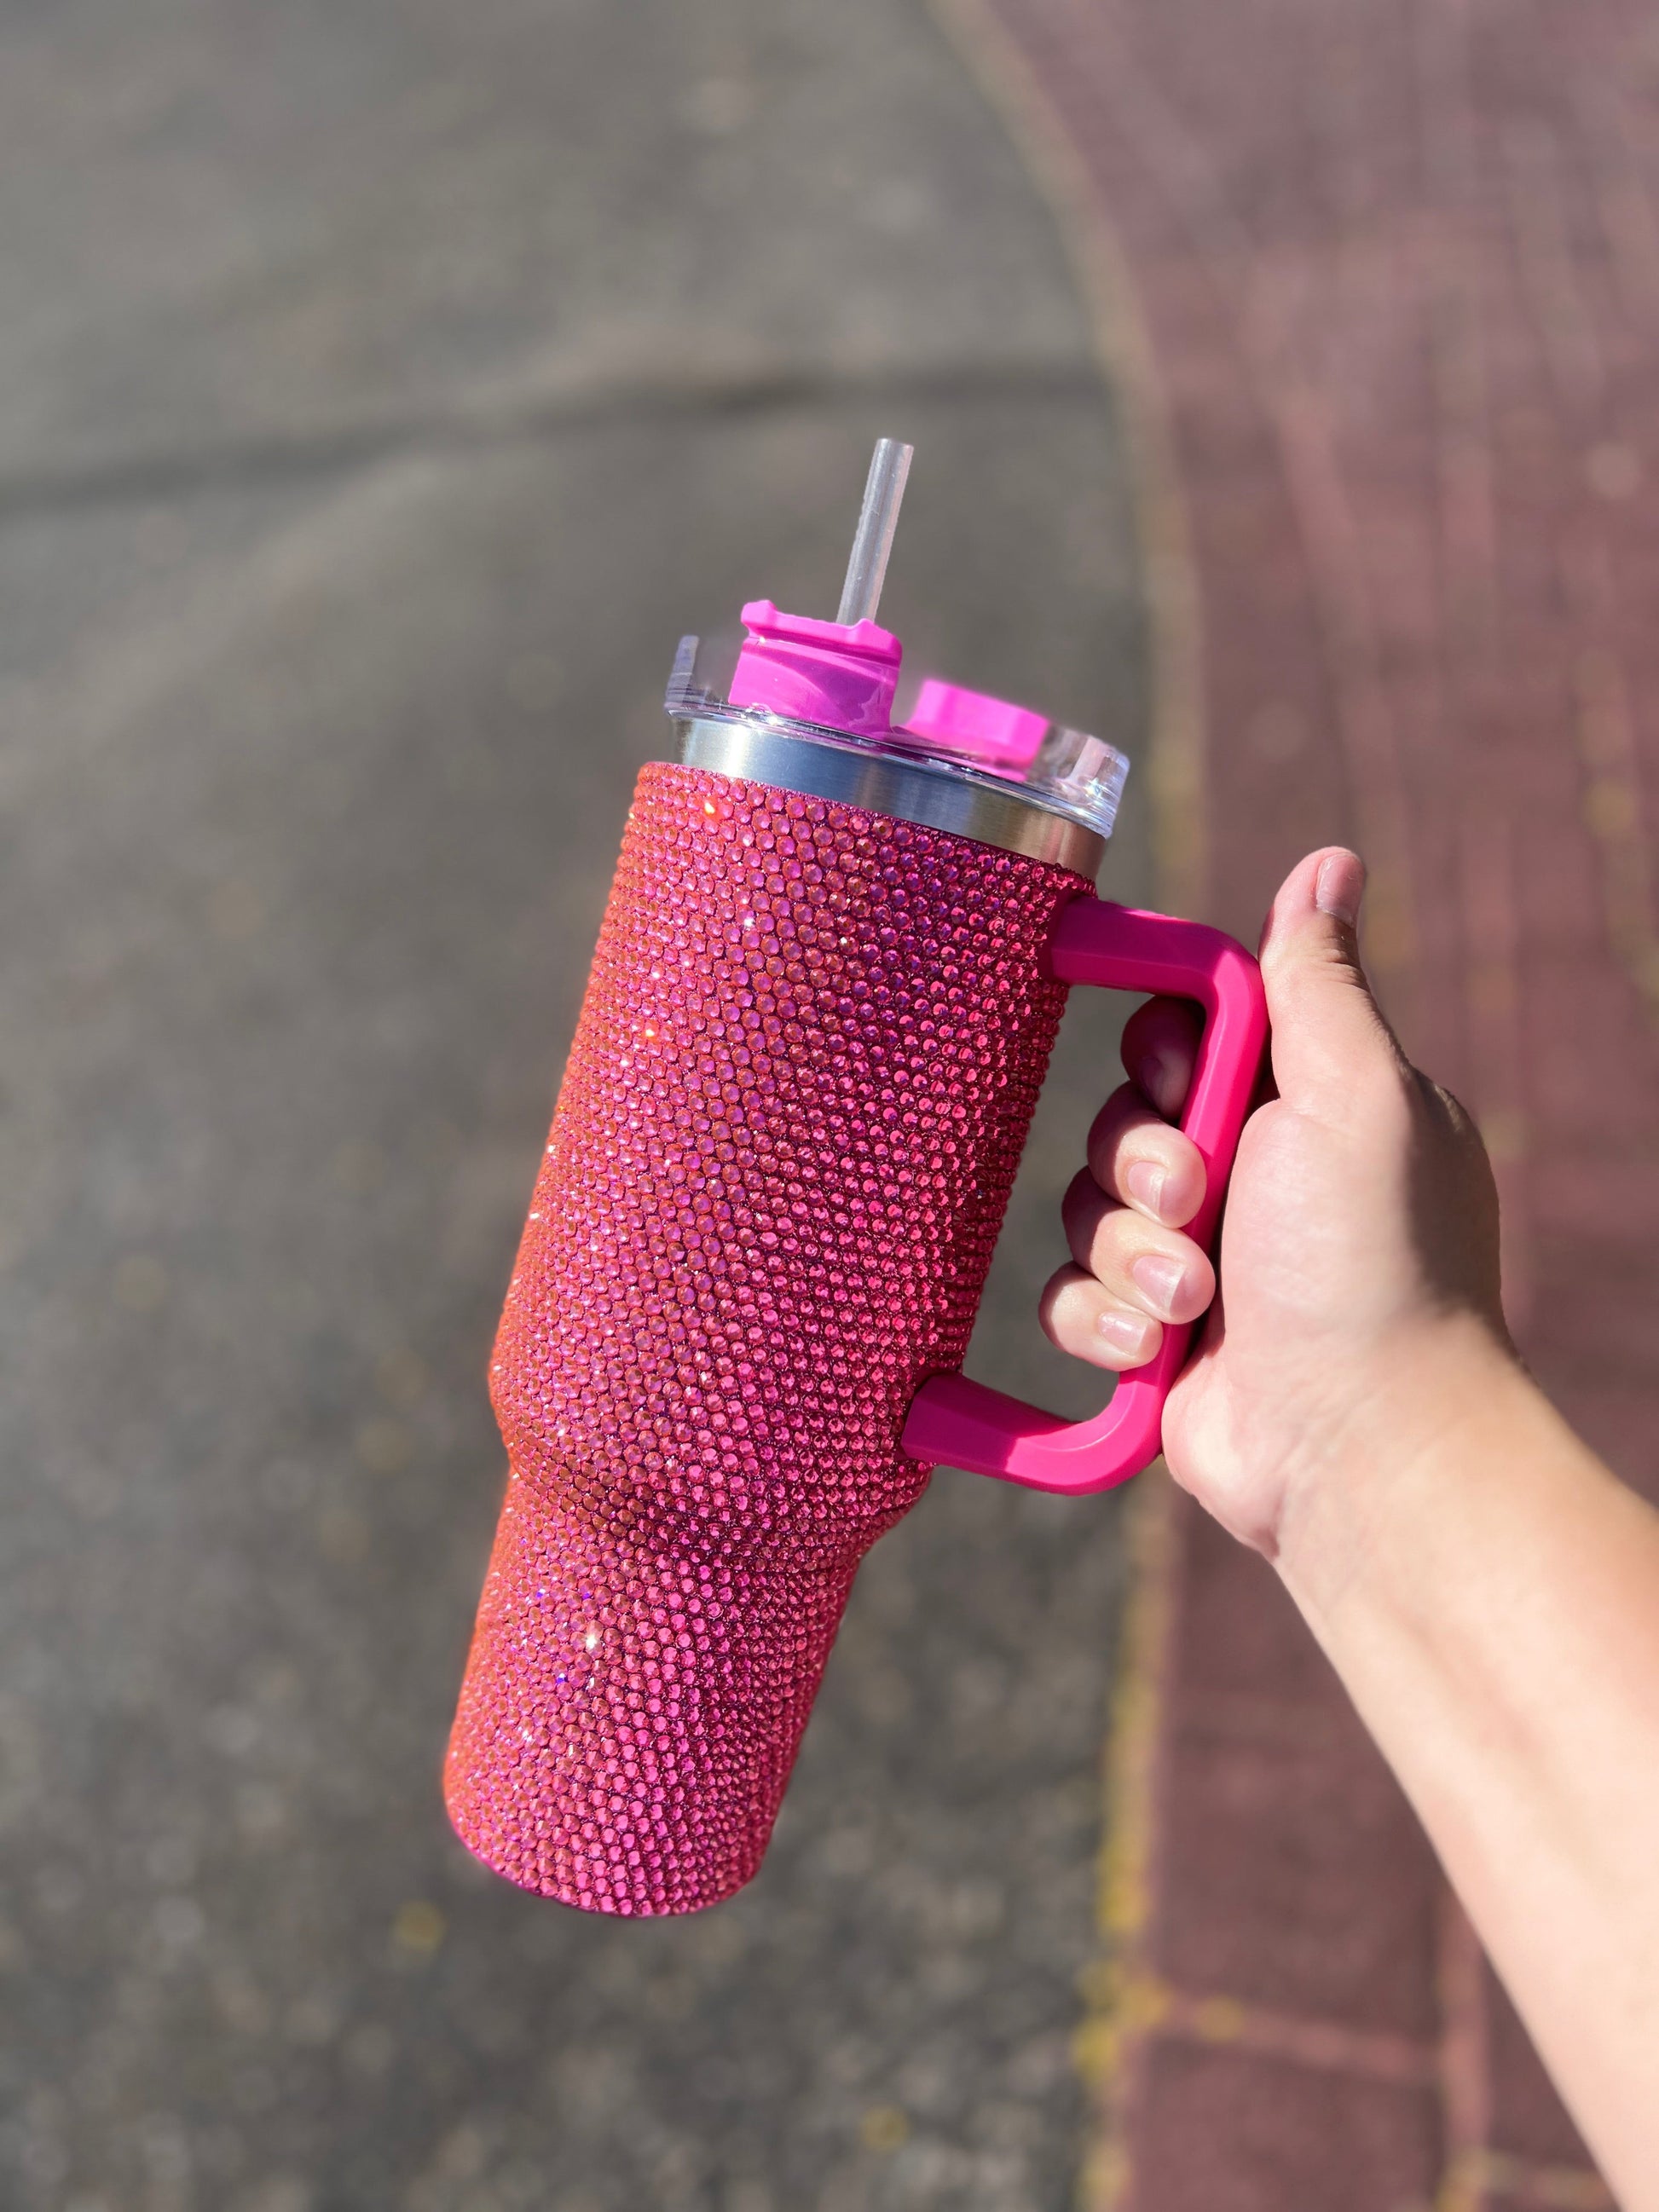 40oz Stainless Steel Insulated Checkered Tumbler - Pink